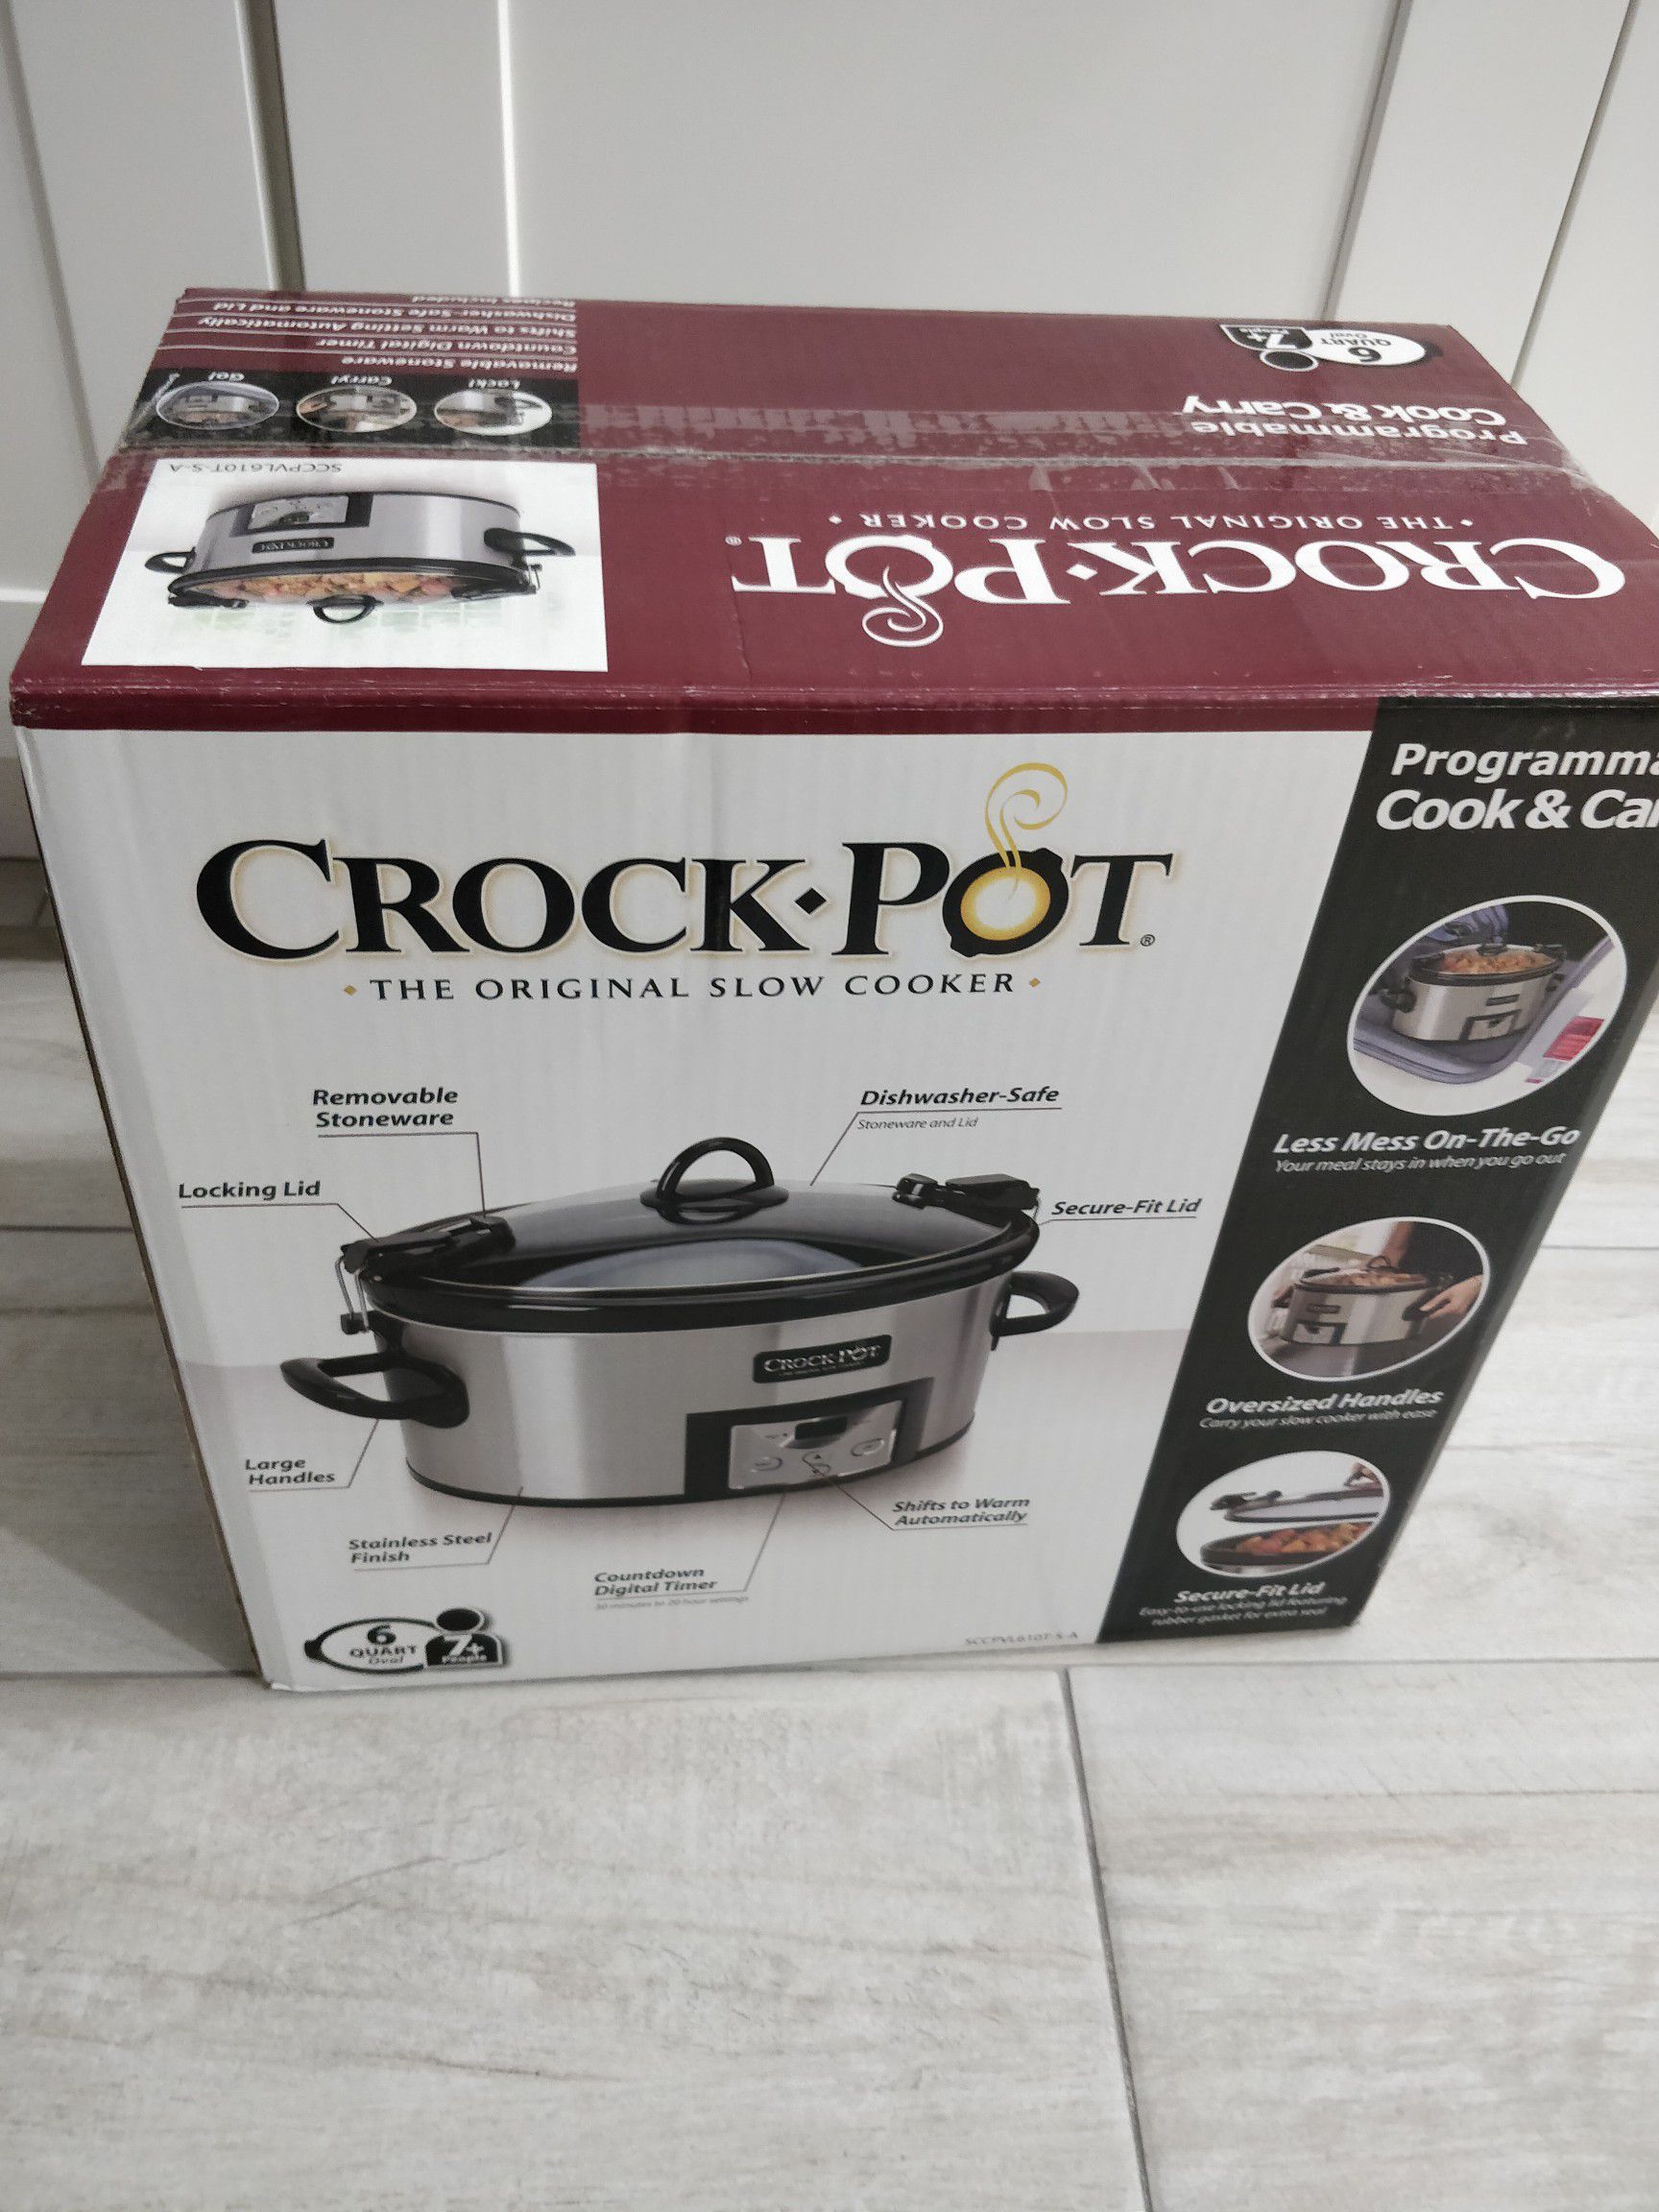 Crock-Pot 6-Quart Cook & Carry Programmable Slow Cooker with Digital Timer, Stainless Steel